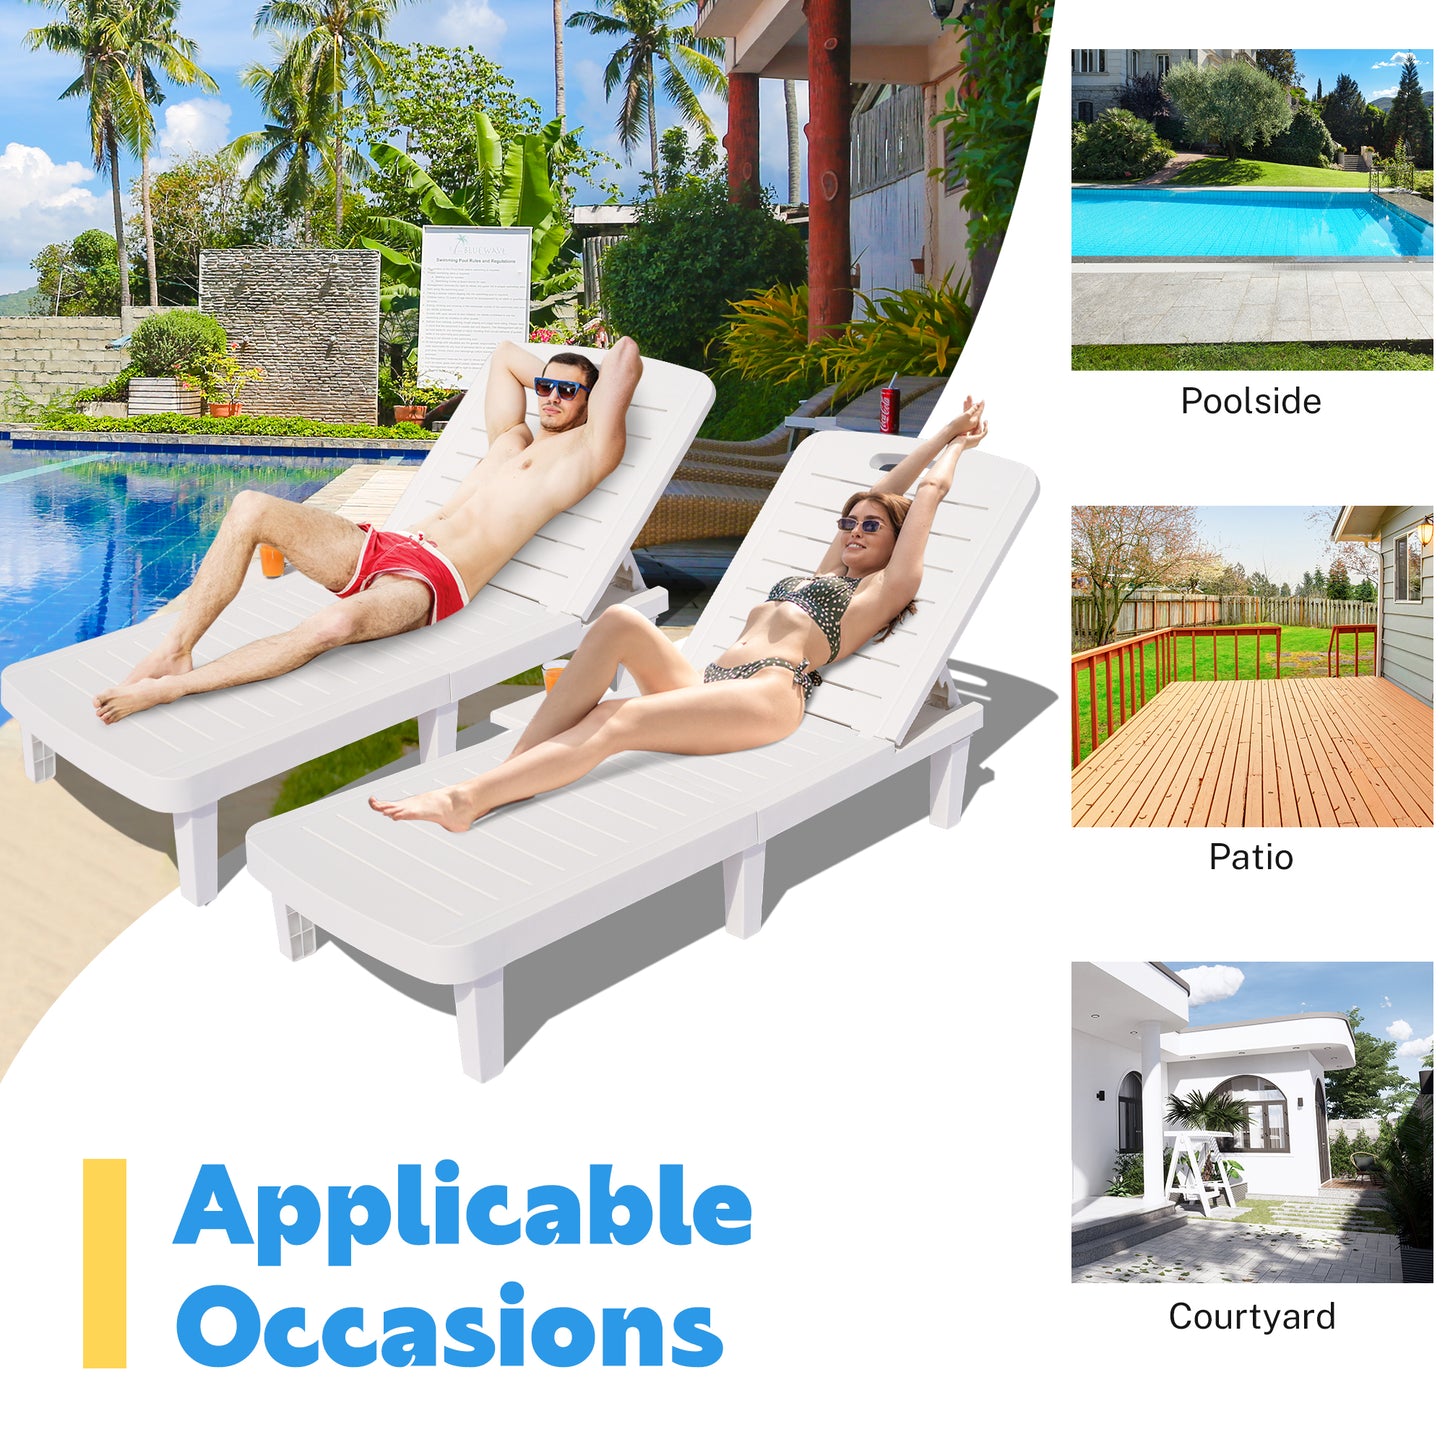 SYNGAR Patio Adjustable Chaise Loungers, Set of 2, Outdoor White PP Resin Lounge Chairs with 5 Angles Adjustable, Poolside Reclining Lounge Chairs, Sun Lounger for Outside, D7052